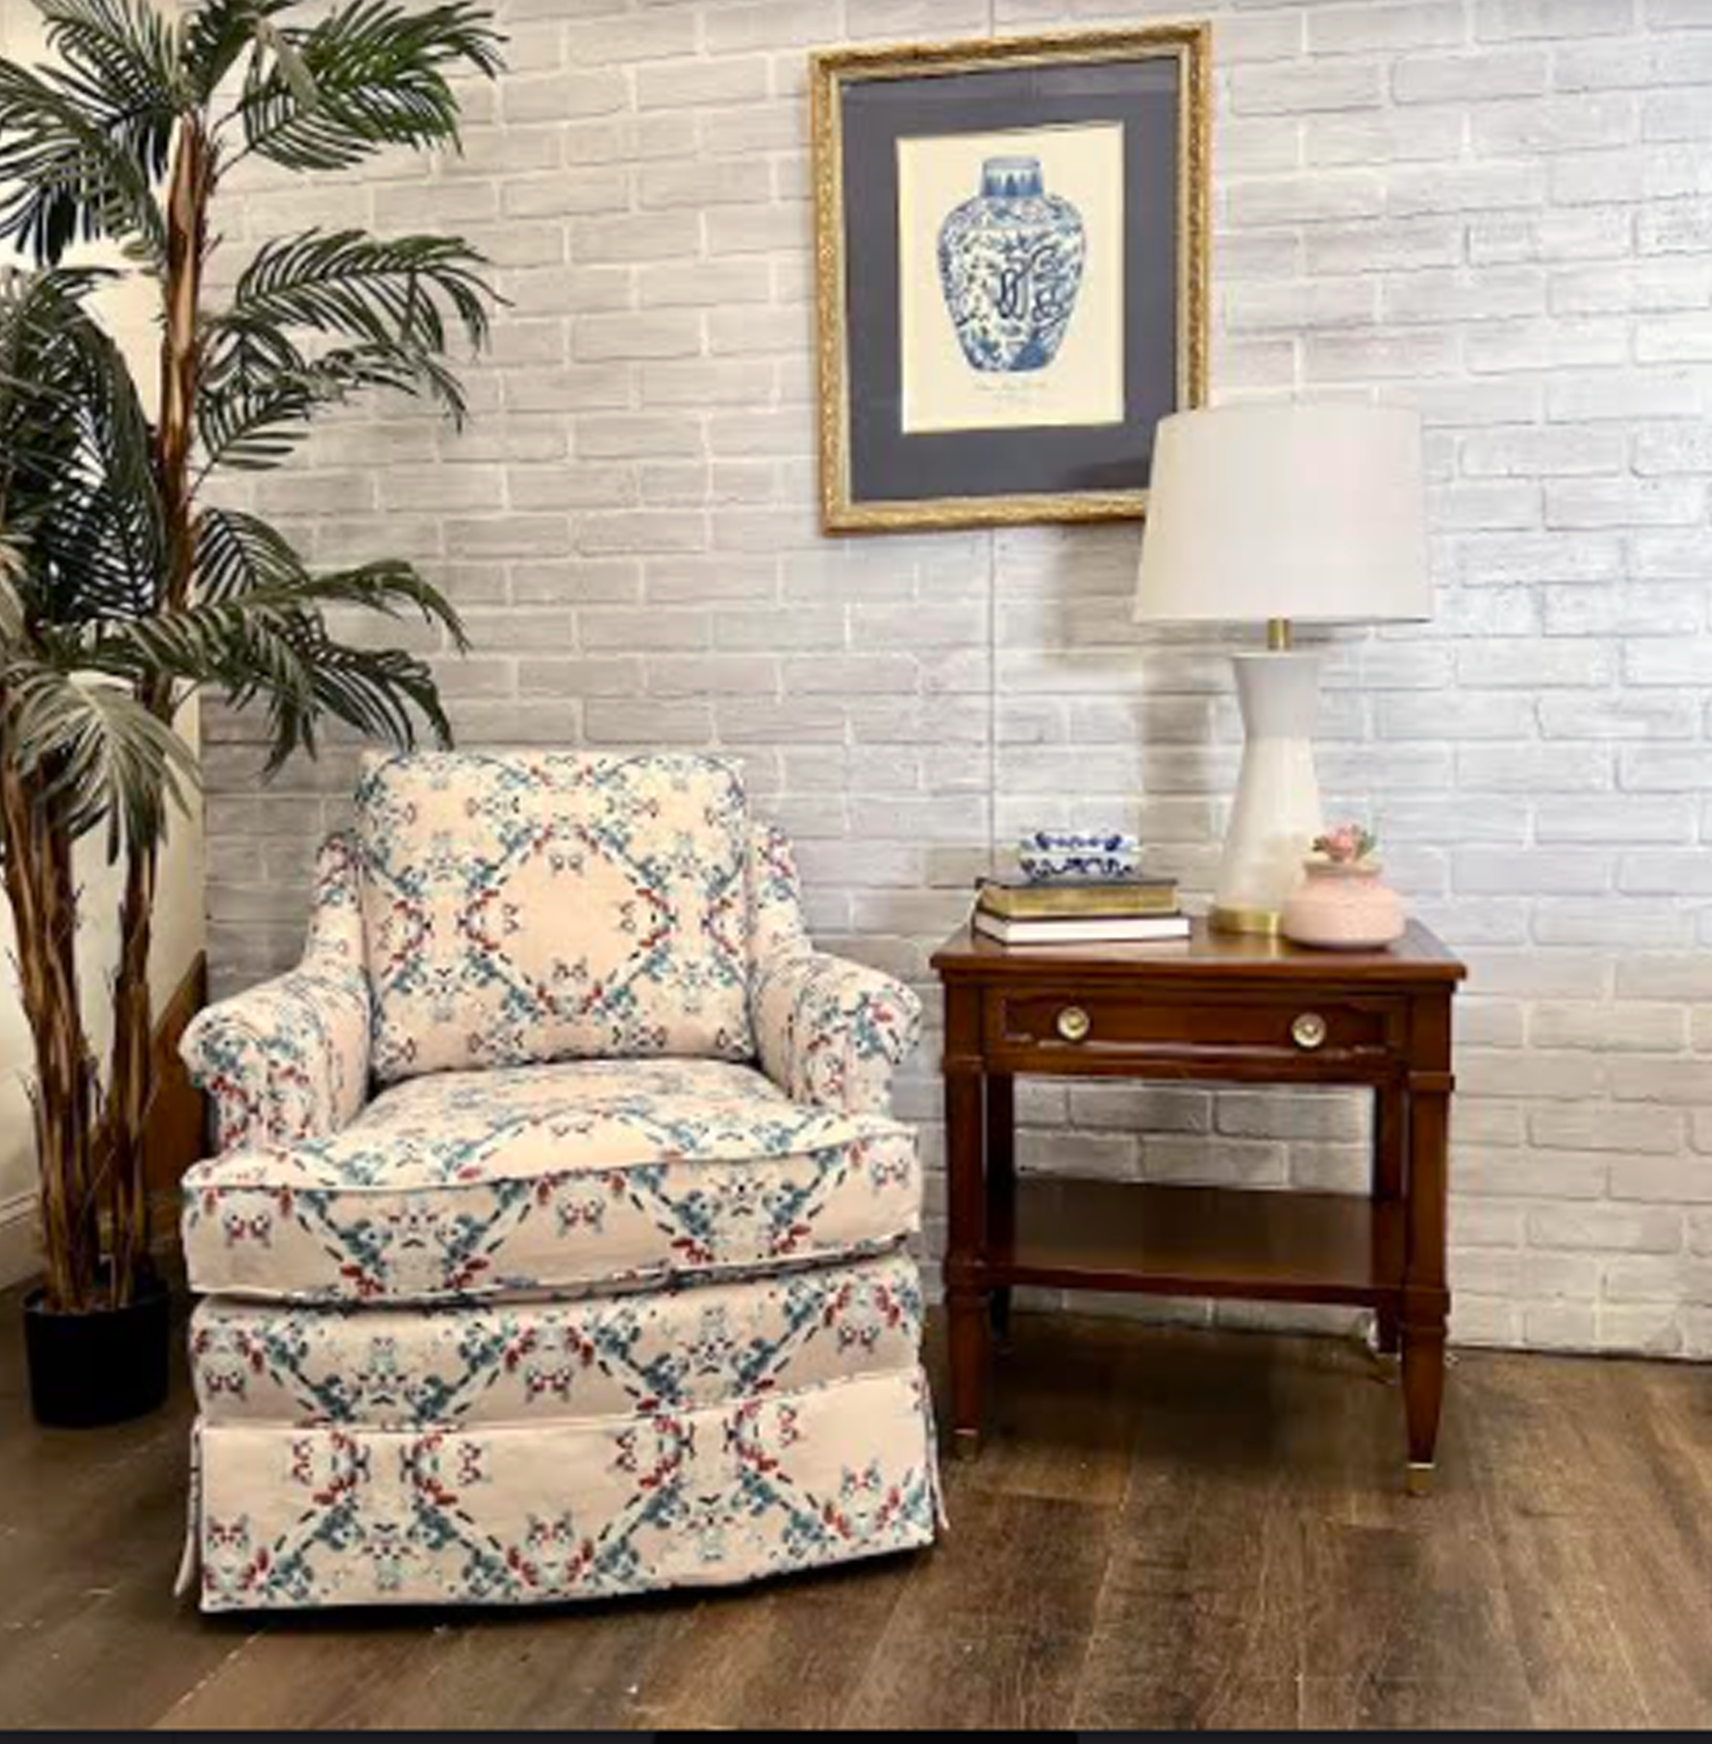 AVAILABLE: Upholstered Arm Chair in blush / blue floral print